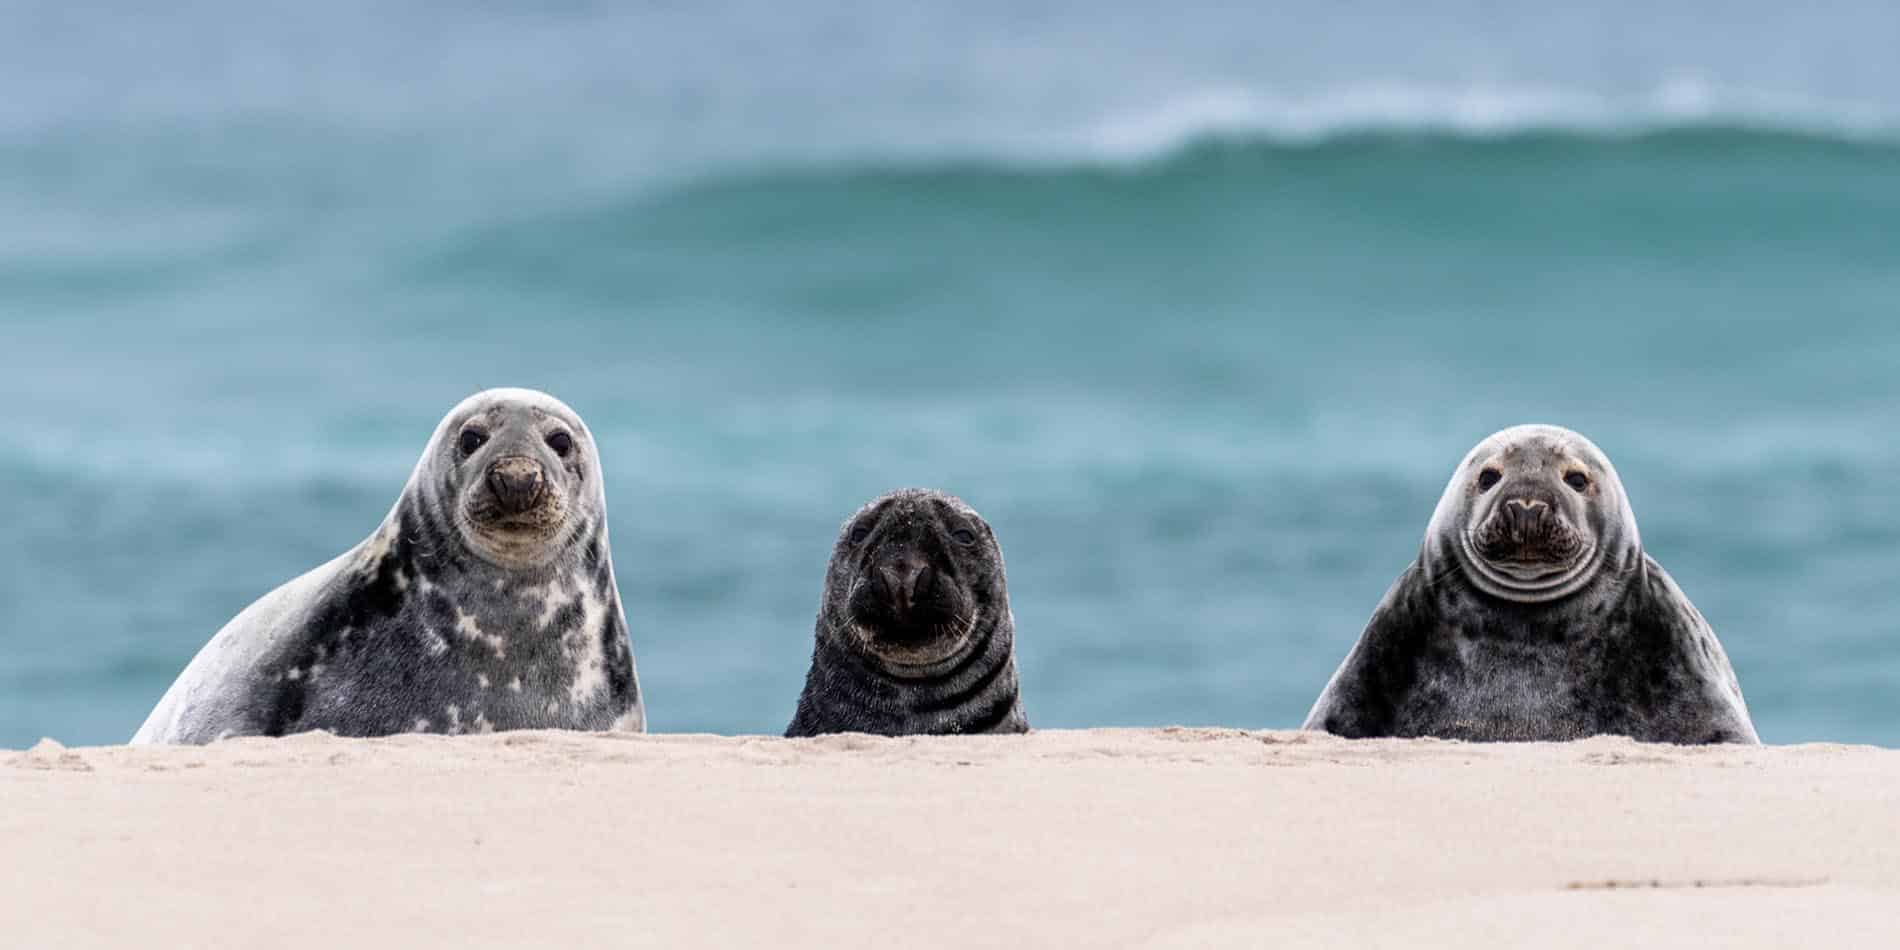 A trio of grey seals stare at visitors to Sable Island, Nova Scotia - photo by Geordie Mott and Picture Perfect Tours.